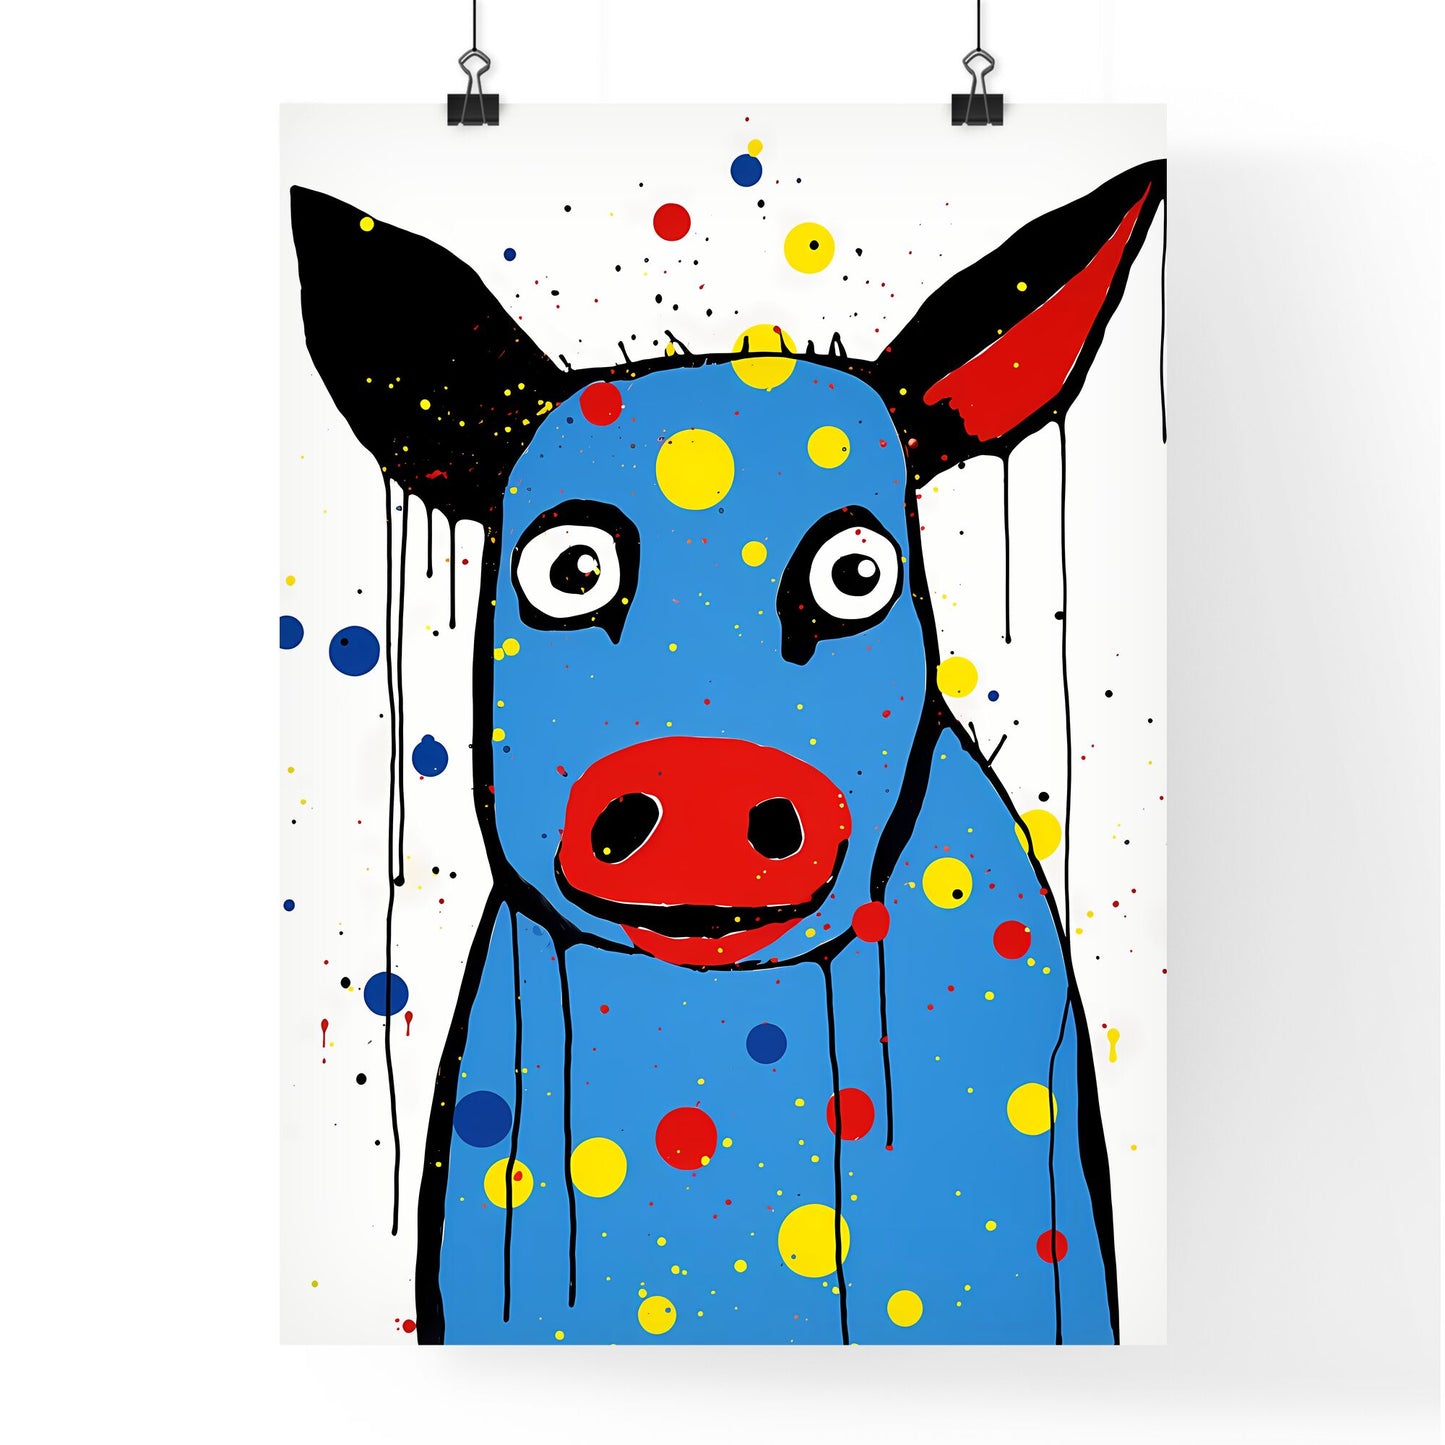 A Poster of minimalist pig art - A Blue Cow With Black Spots And Red Nose Default Title